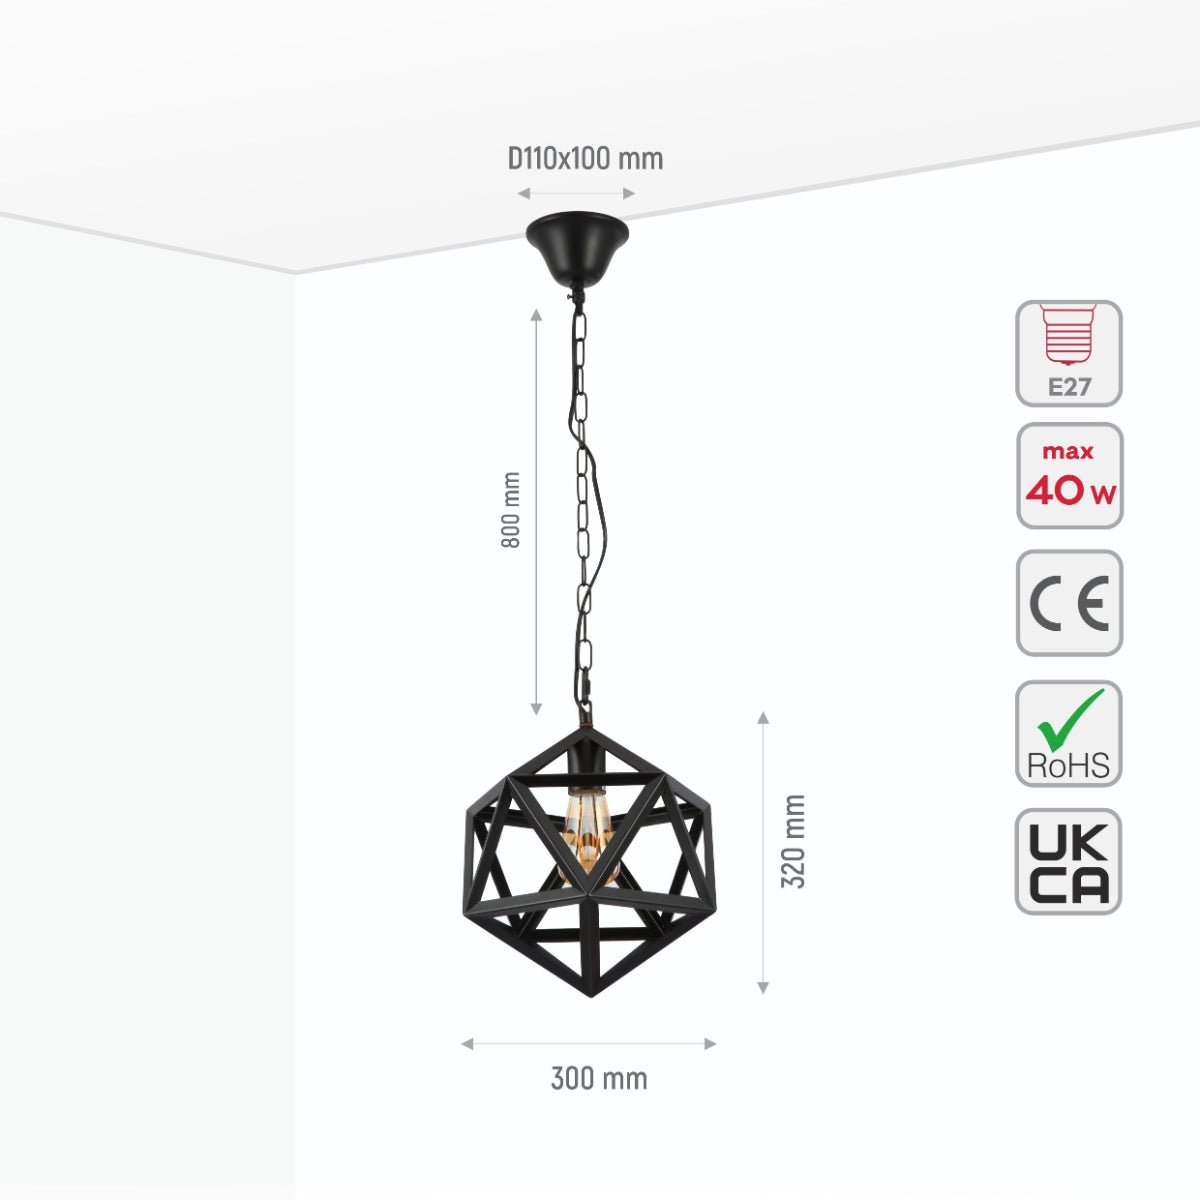 Size and specs of Black Metal Cage Polyhedral Pendant Ceiling Light with E27 | TEKLED 150-17834